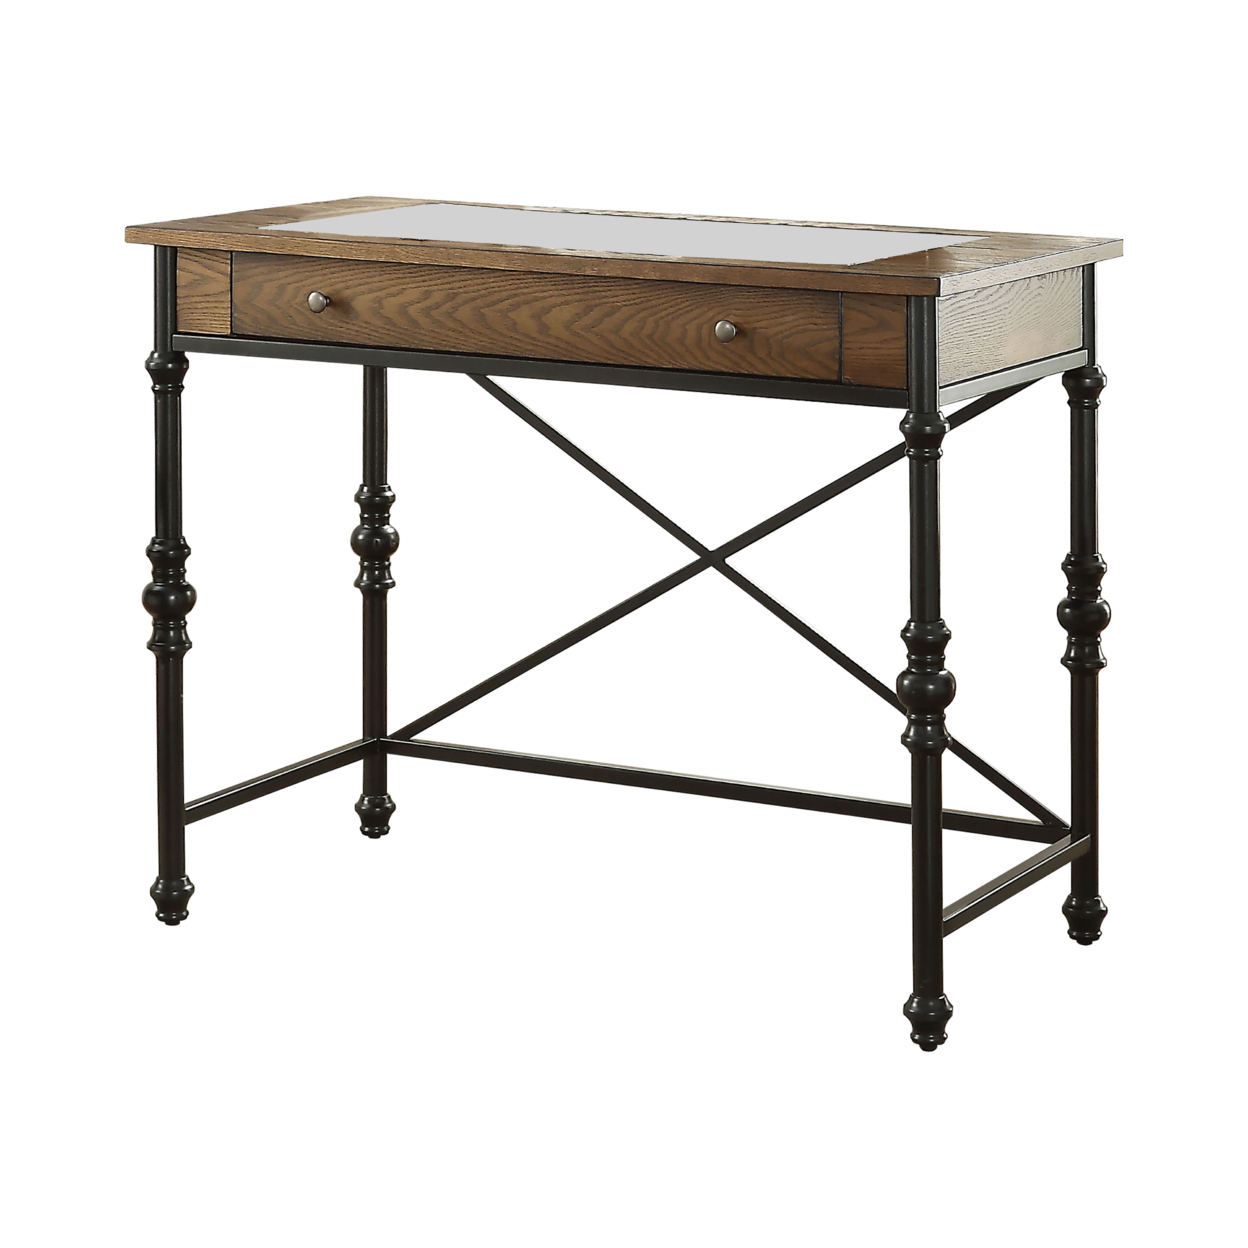 Wood And Metal Counter Height Table With One Large Drawer, Walnut & Black- Saltoro Sherpi